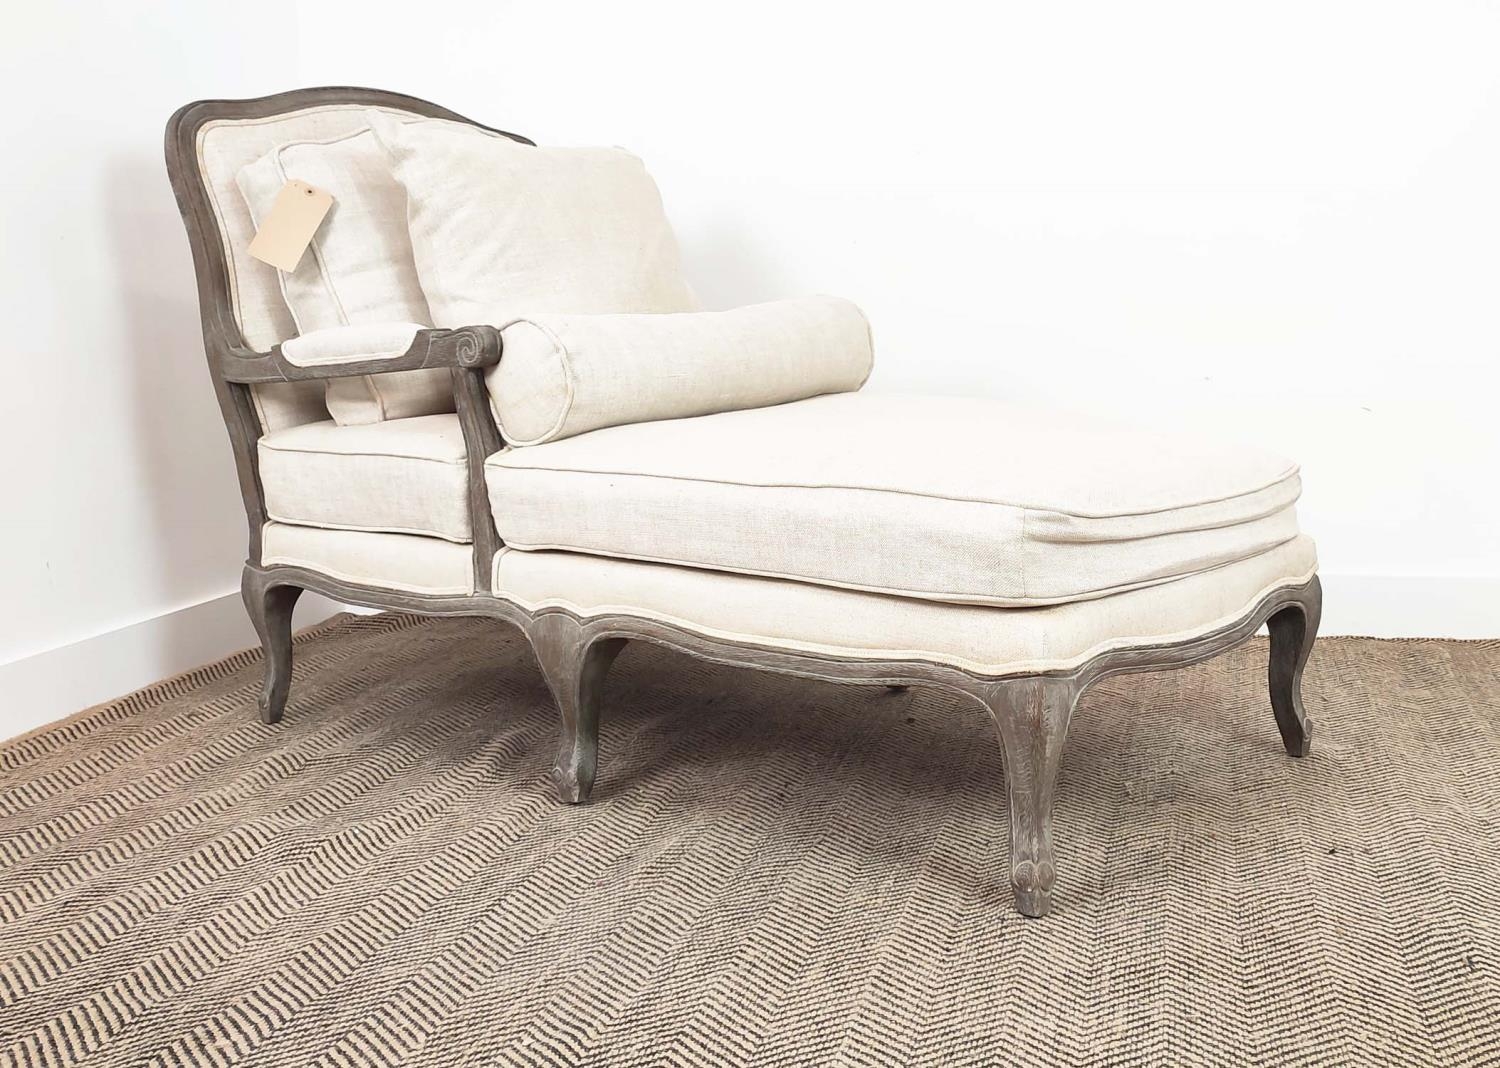 DAYBED, grey linen upholstered with a showframe, 73cm x 99cm H x 148cm L. - Image 2 of 7